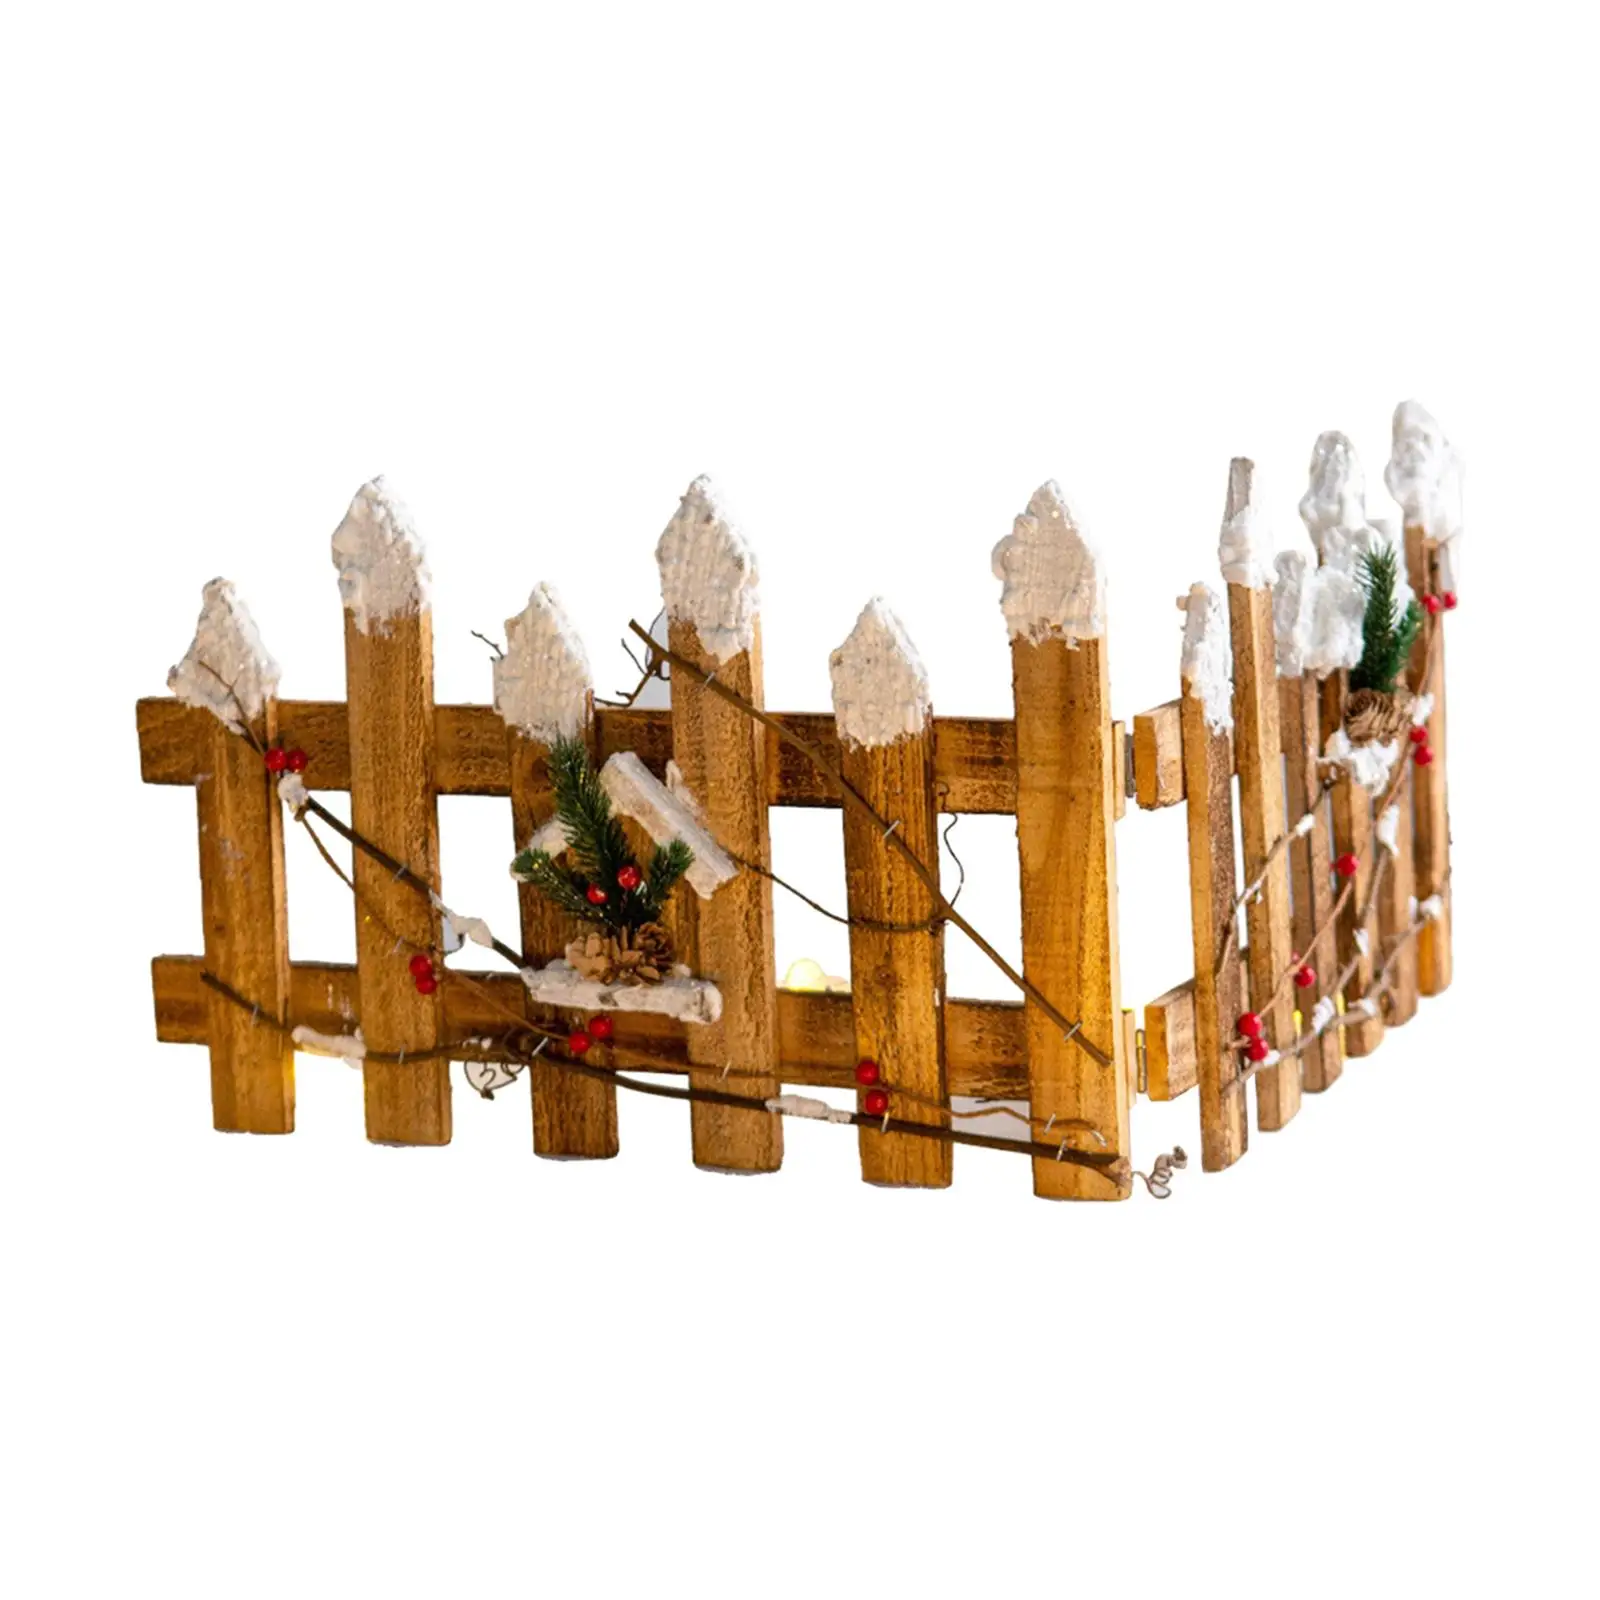 Christmas Wooden Picket Fence Wood Christmas Tree Fence Decoration Indoor Garden Decoration for Holiday Home Party Decor